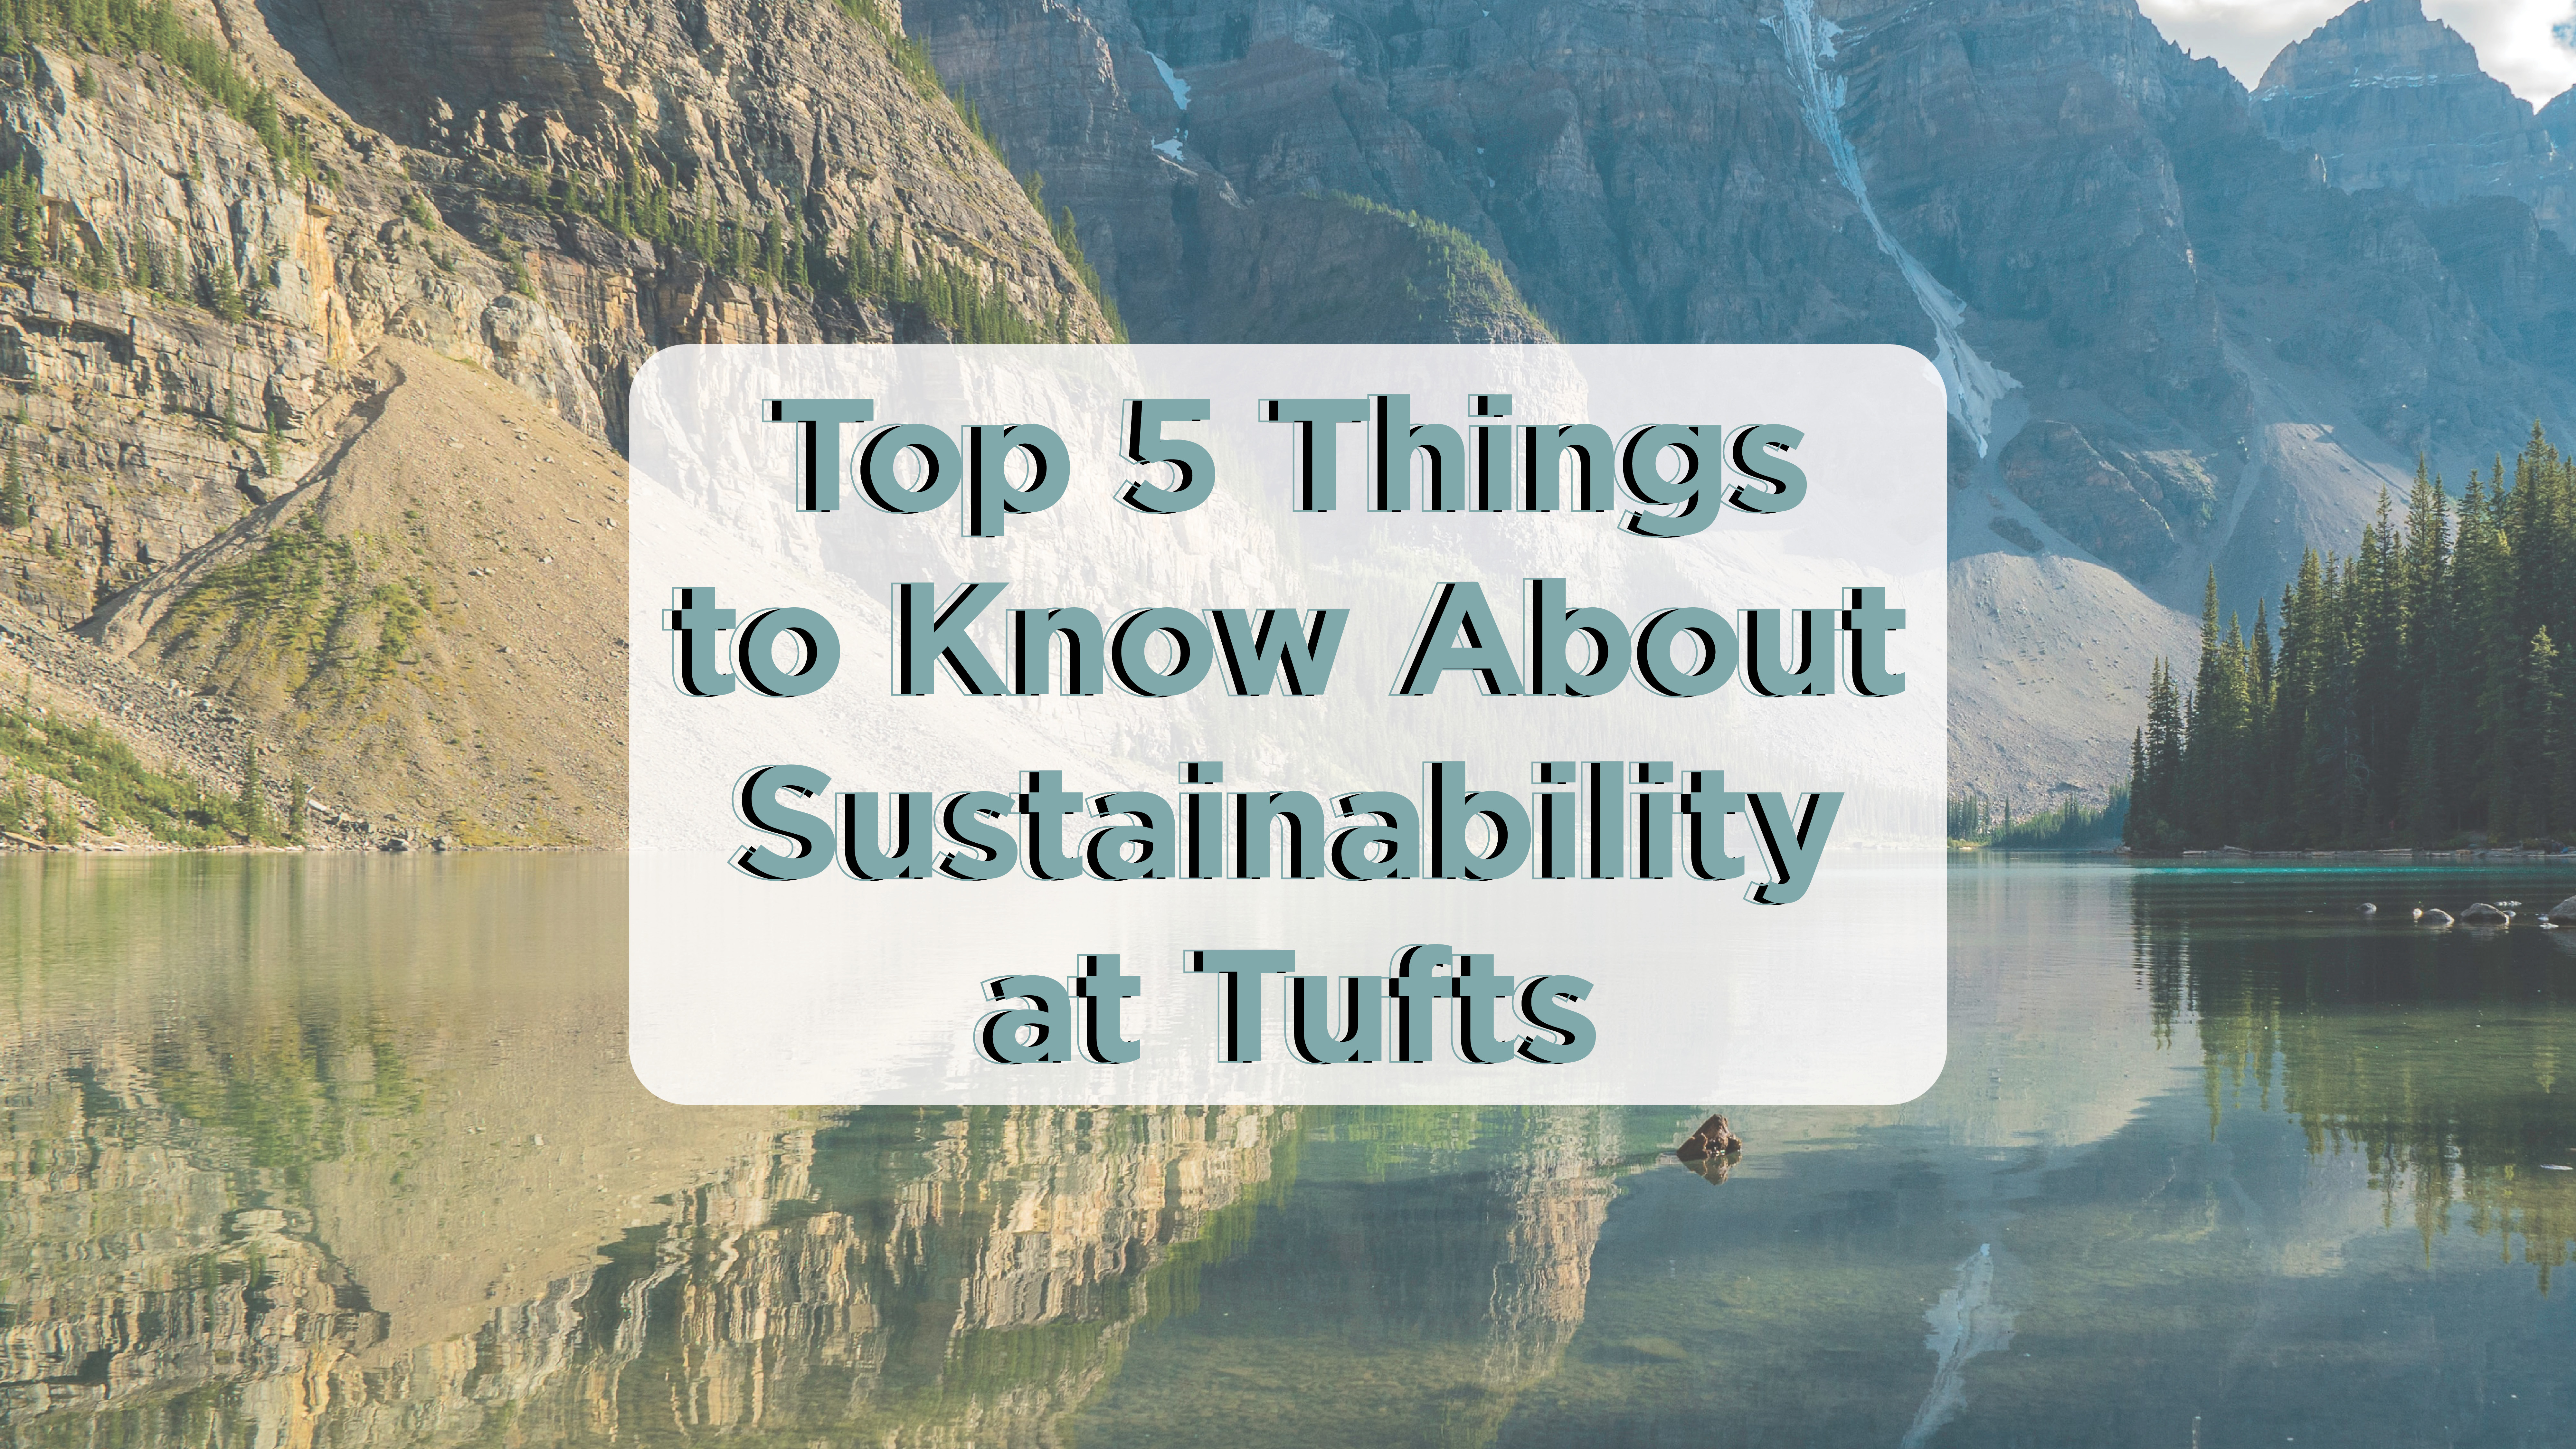 Top 5 Things to Know About Sustainability at Tufts